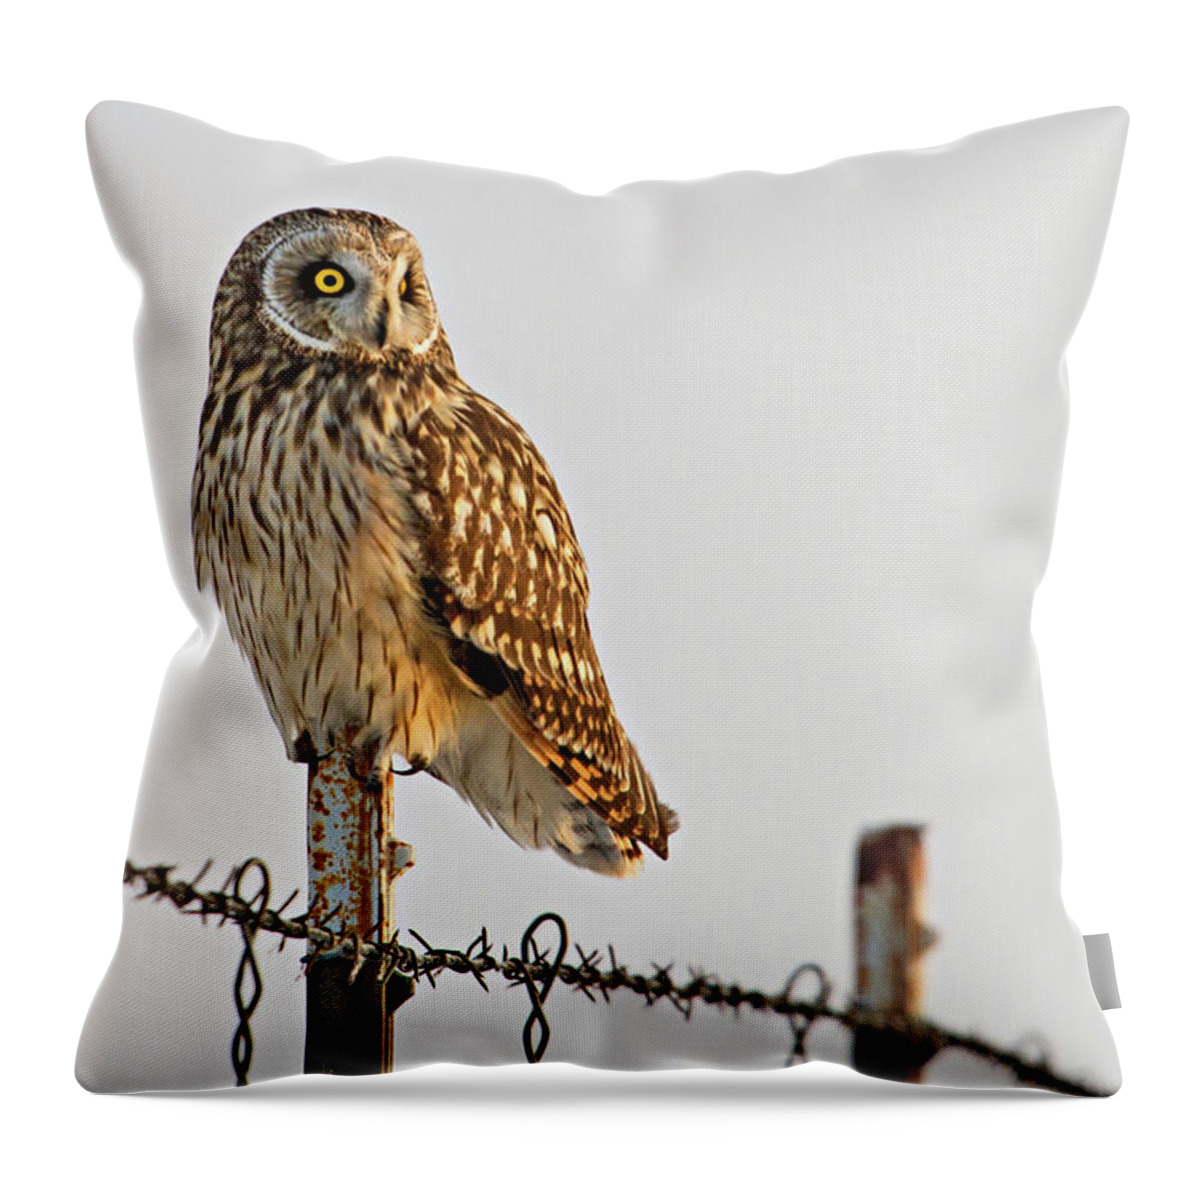 Birds Throw Pillow featuring the photograph Short-eared Owl by Wesley Aston